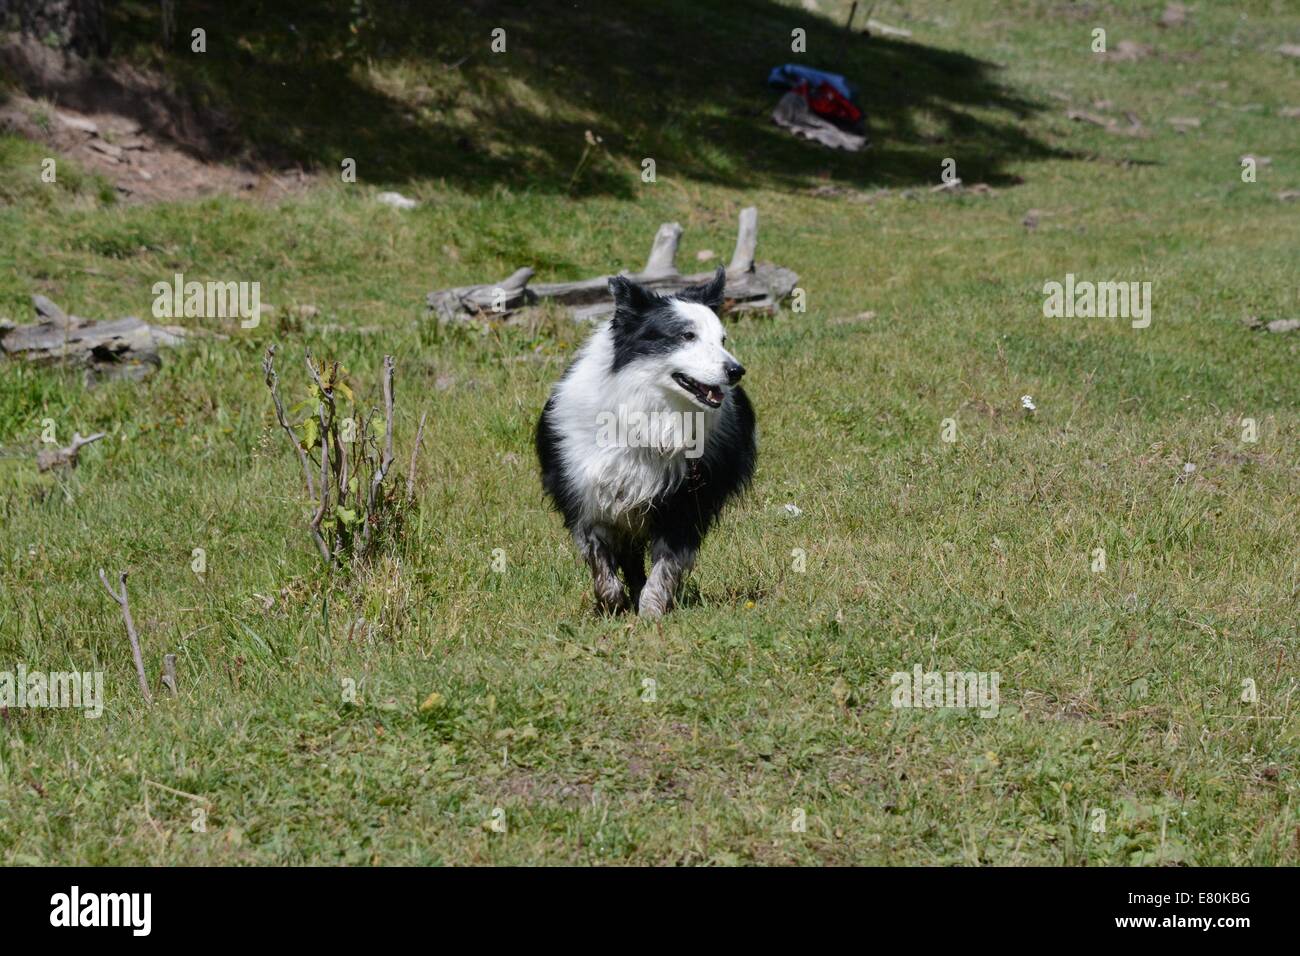 Dog playing in grass Stock Photo